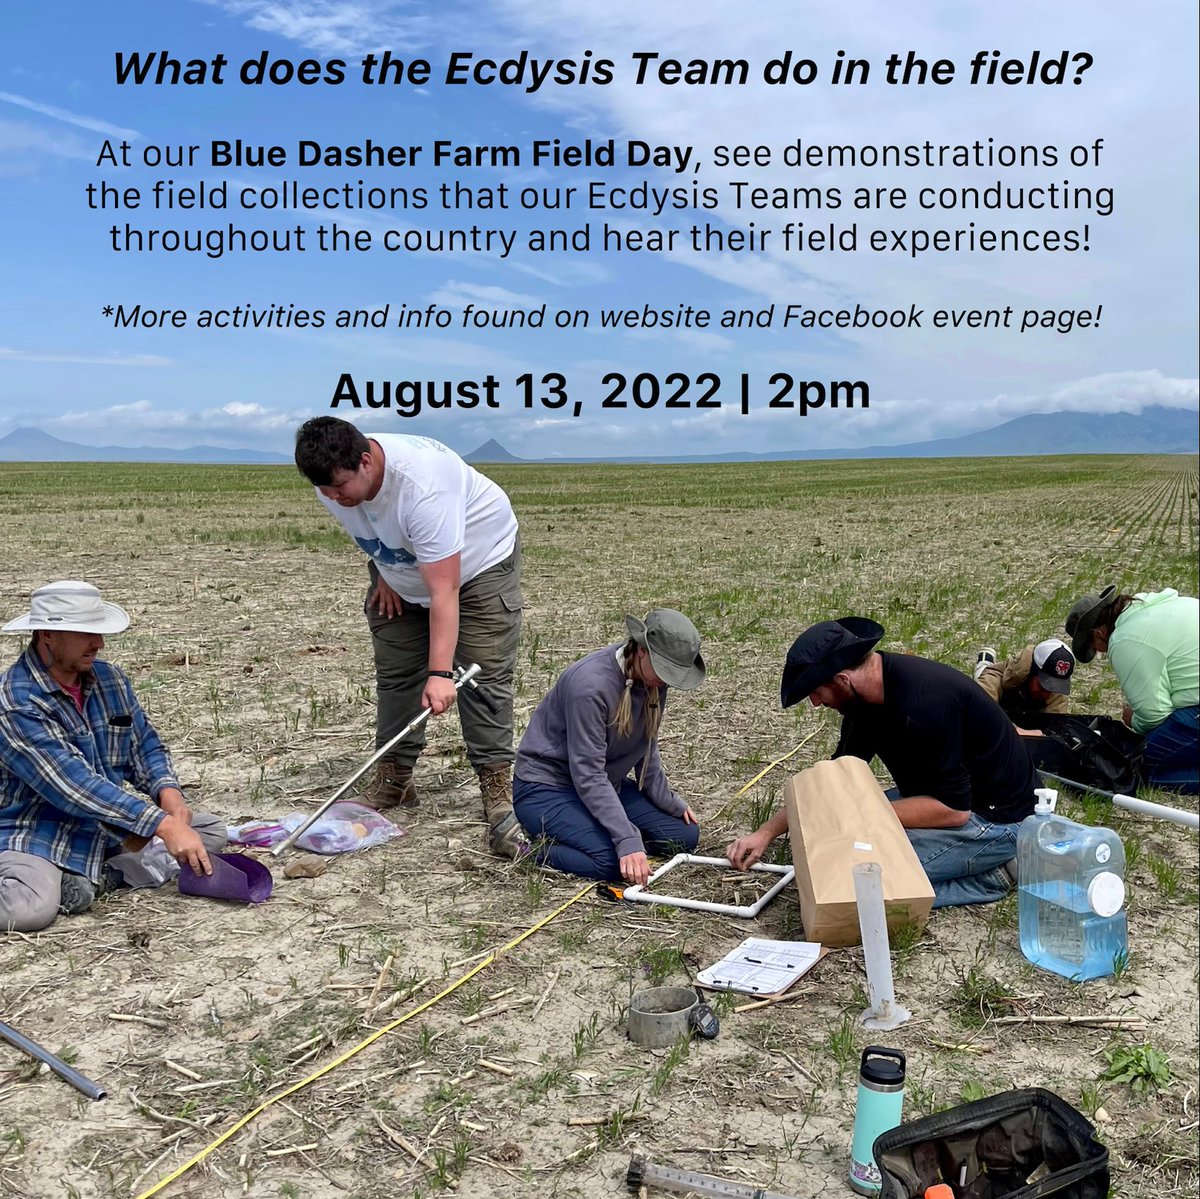 Come and join us for Ecdysis Foundation and Blue Dasher Farm’s field day! Spread the word!